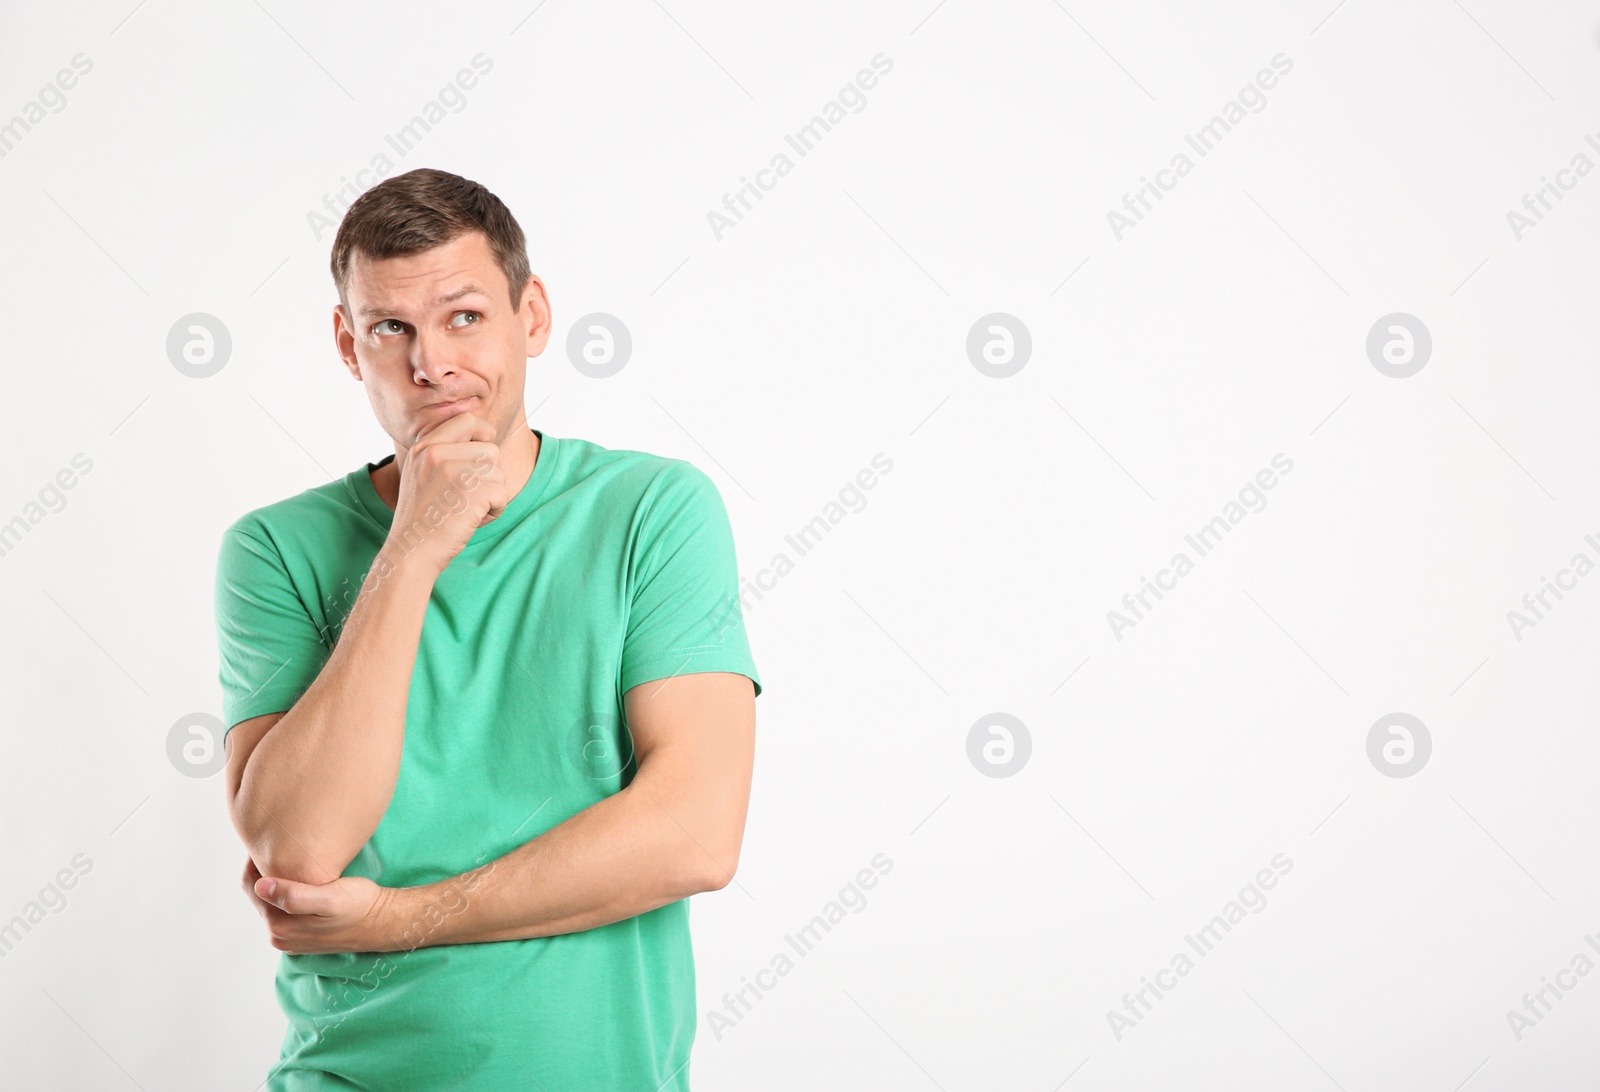 Photo of Emotional man in casual outfit on white background